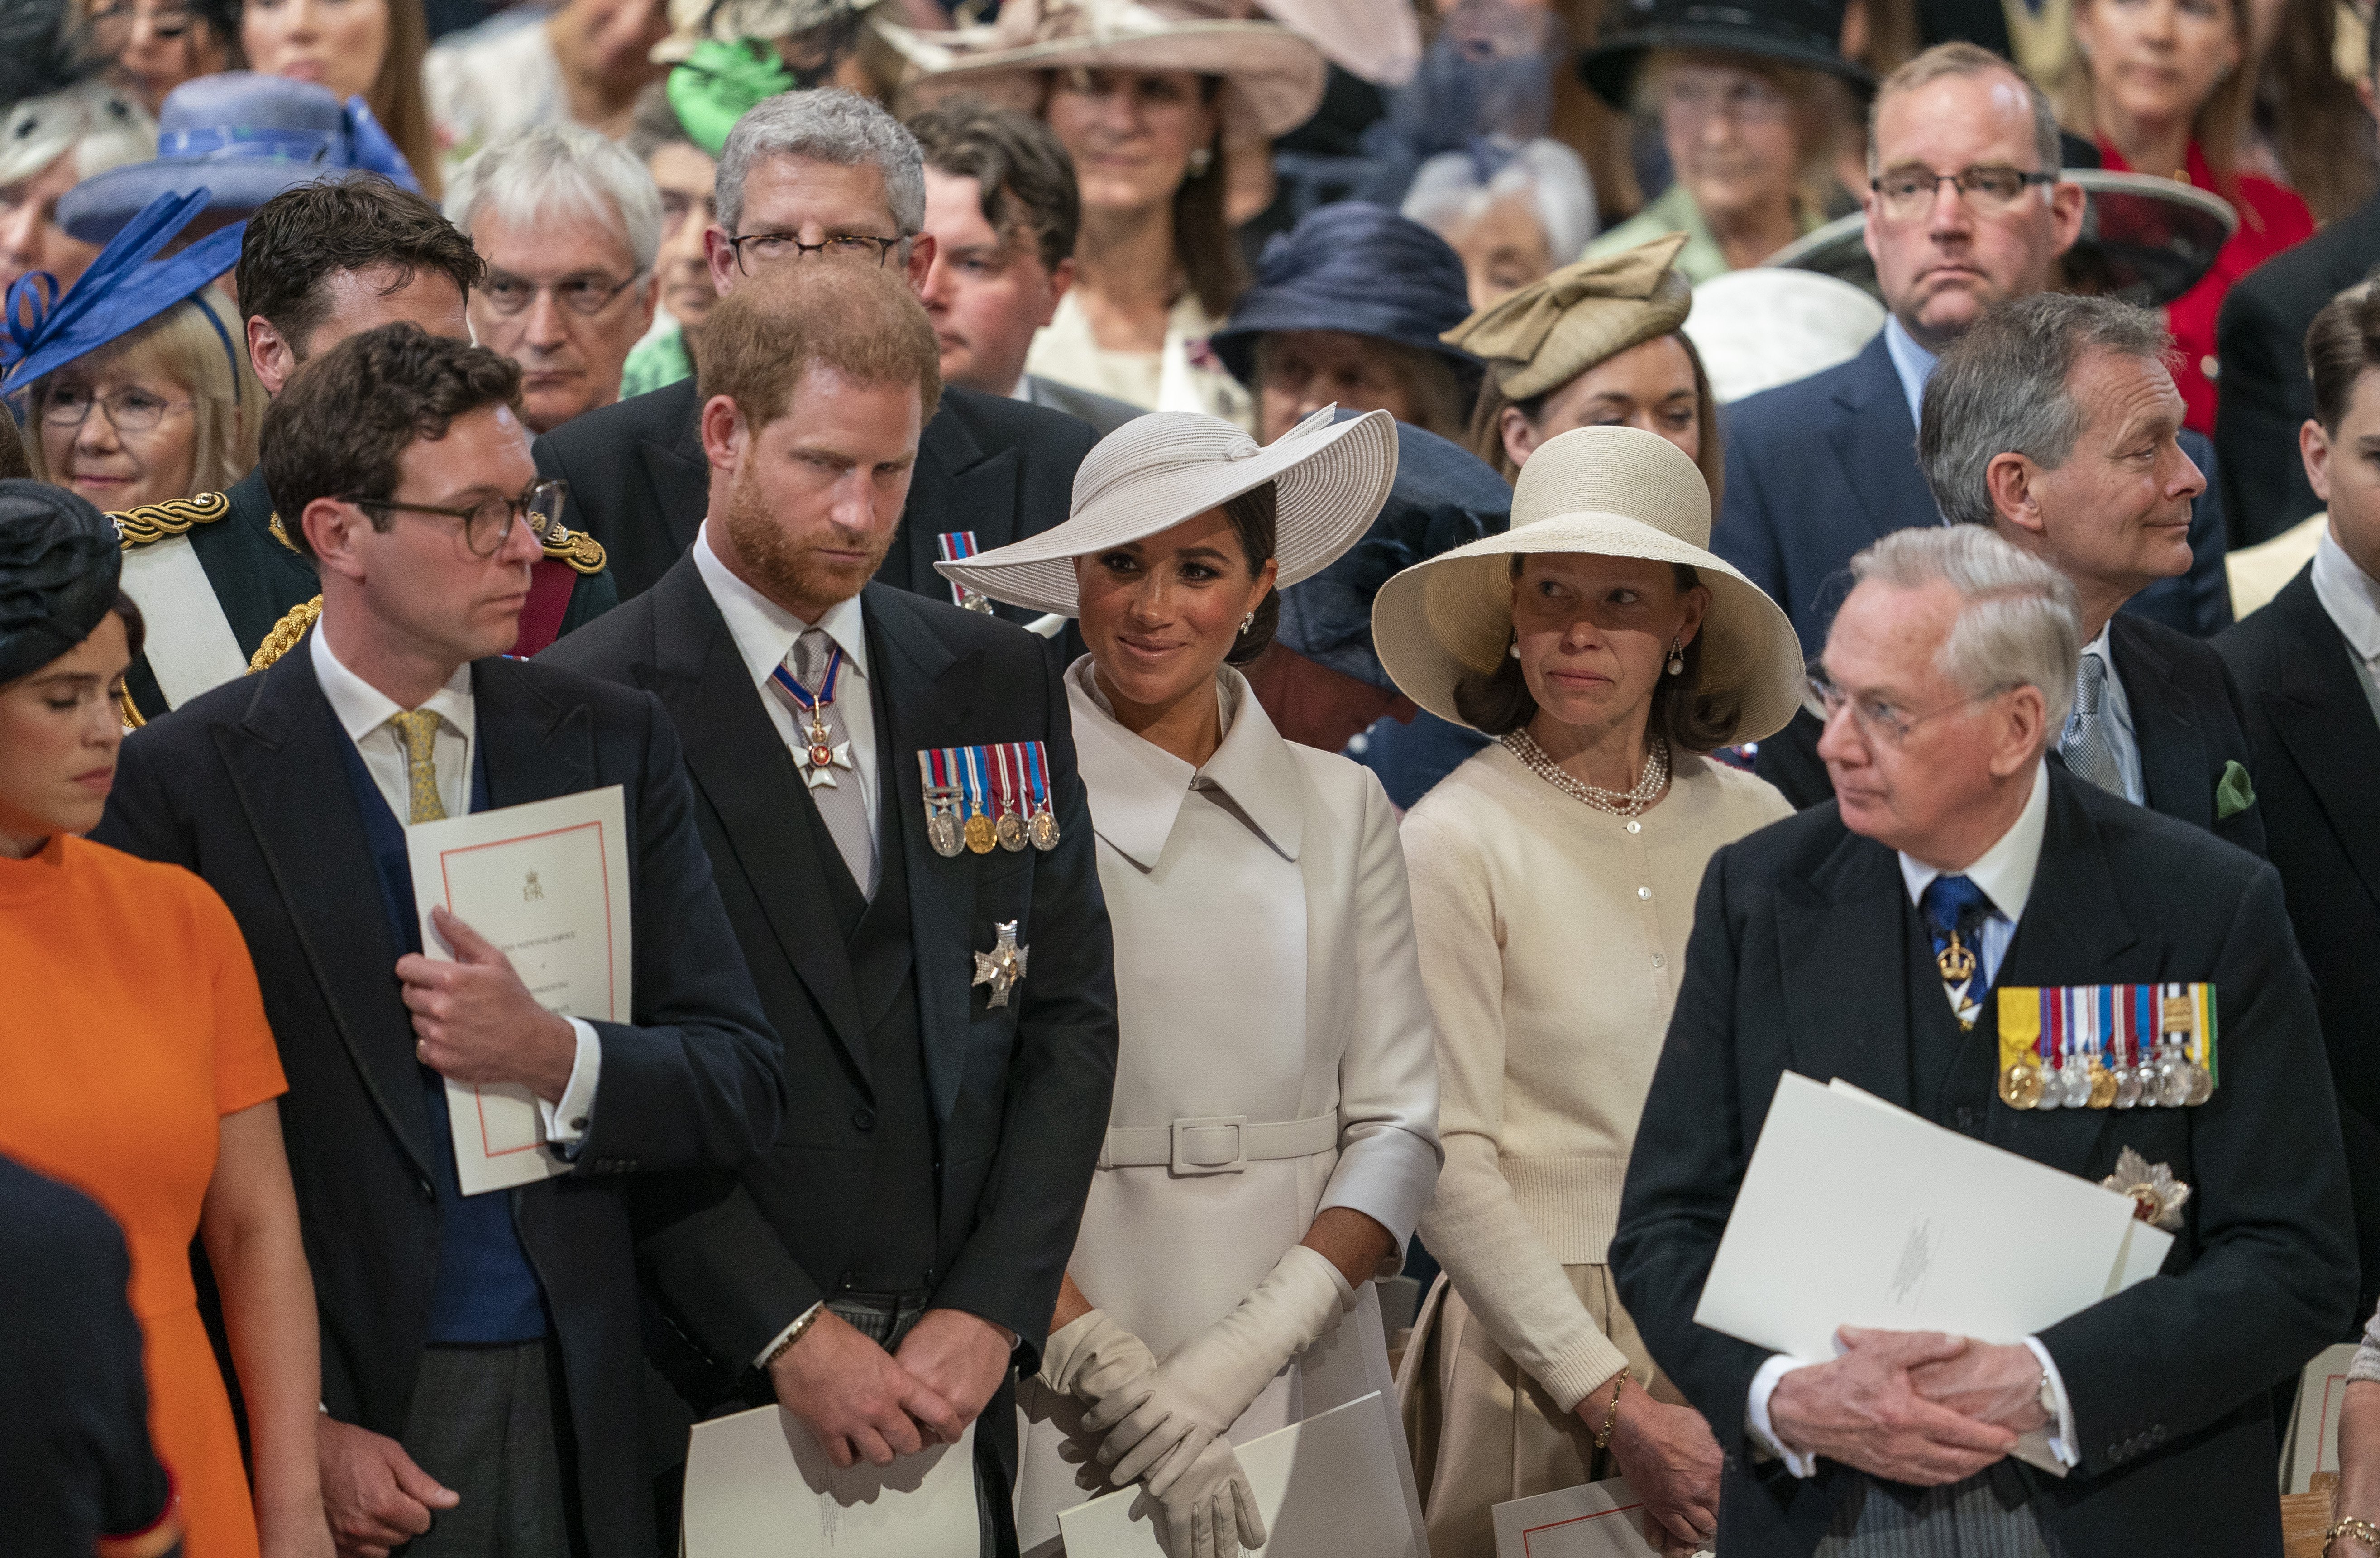 Princess Eugenie, Jack Brooksbank, Prince Harry and Meghan Markle in London 2022. | Source: Getty Images